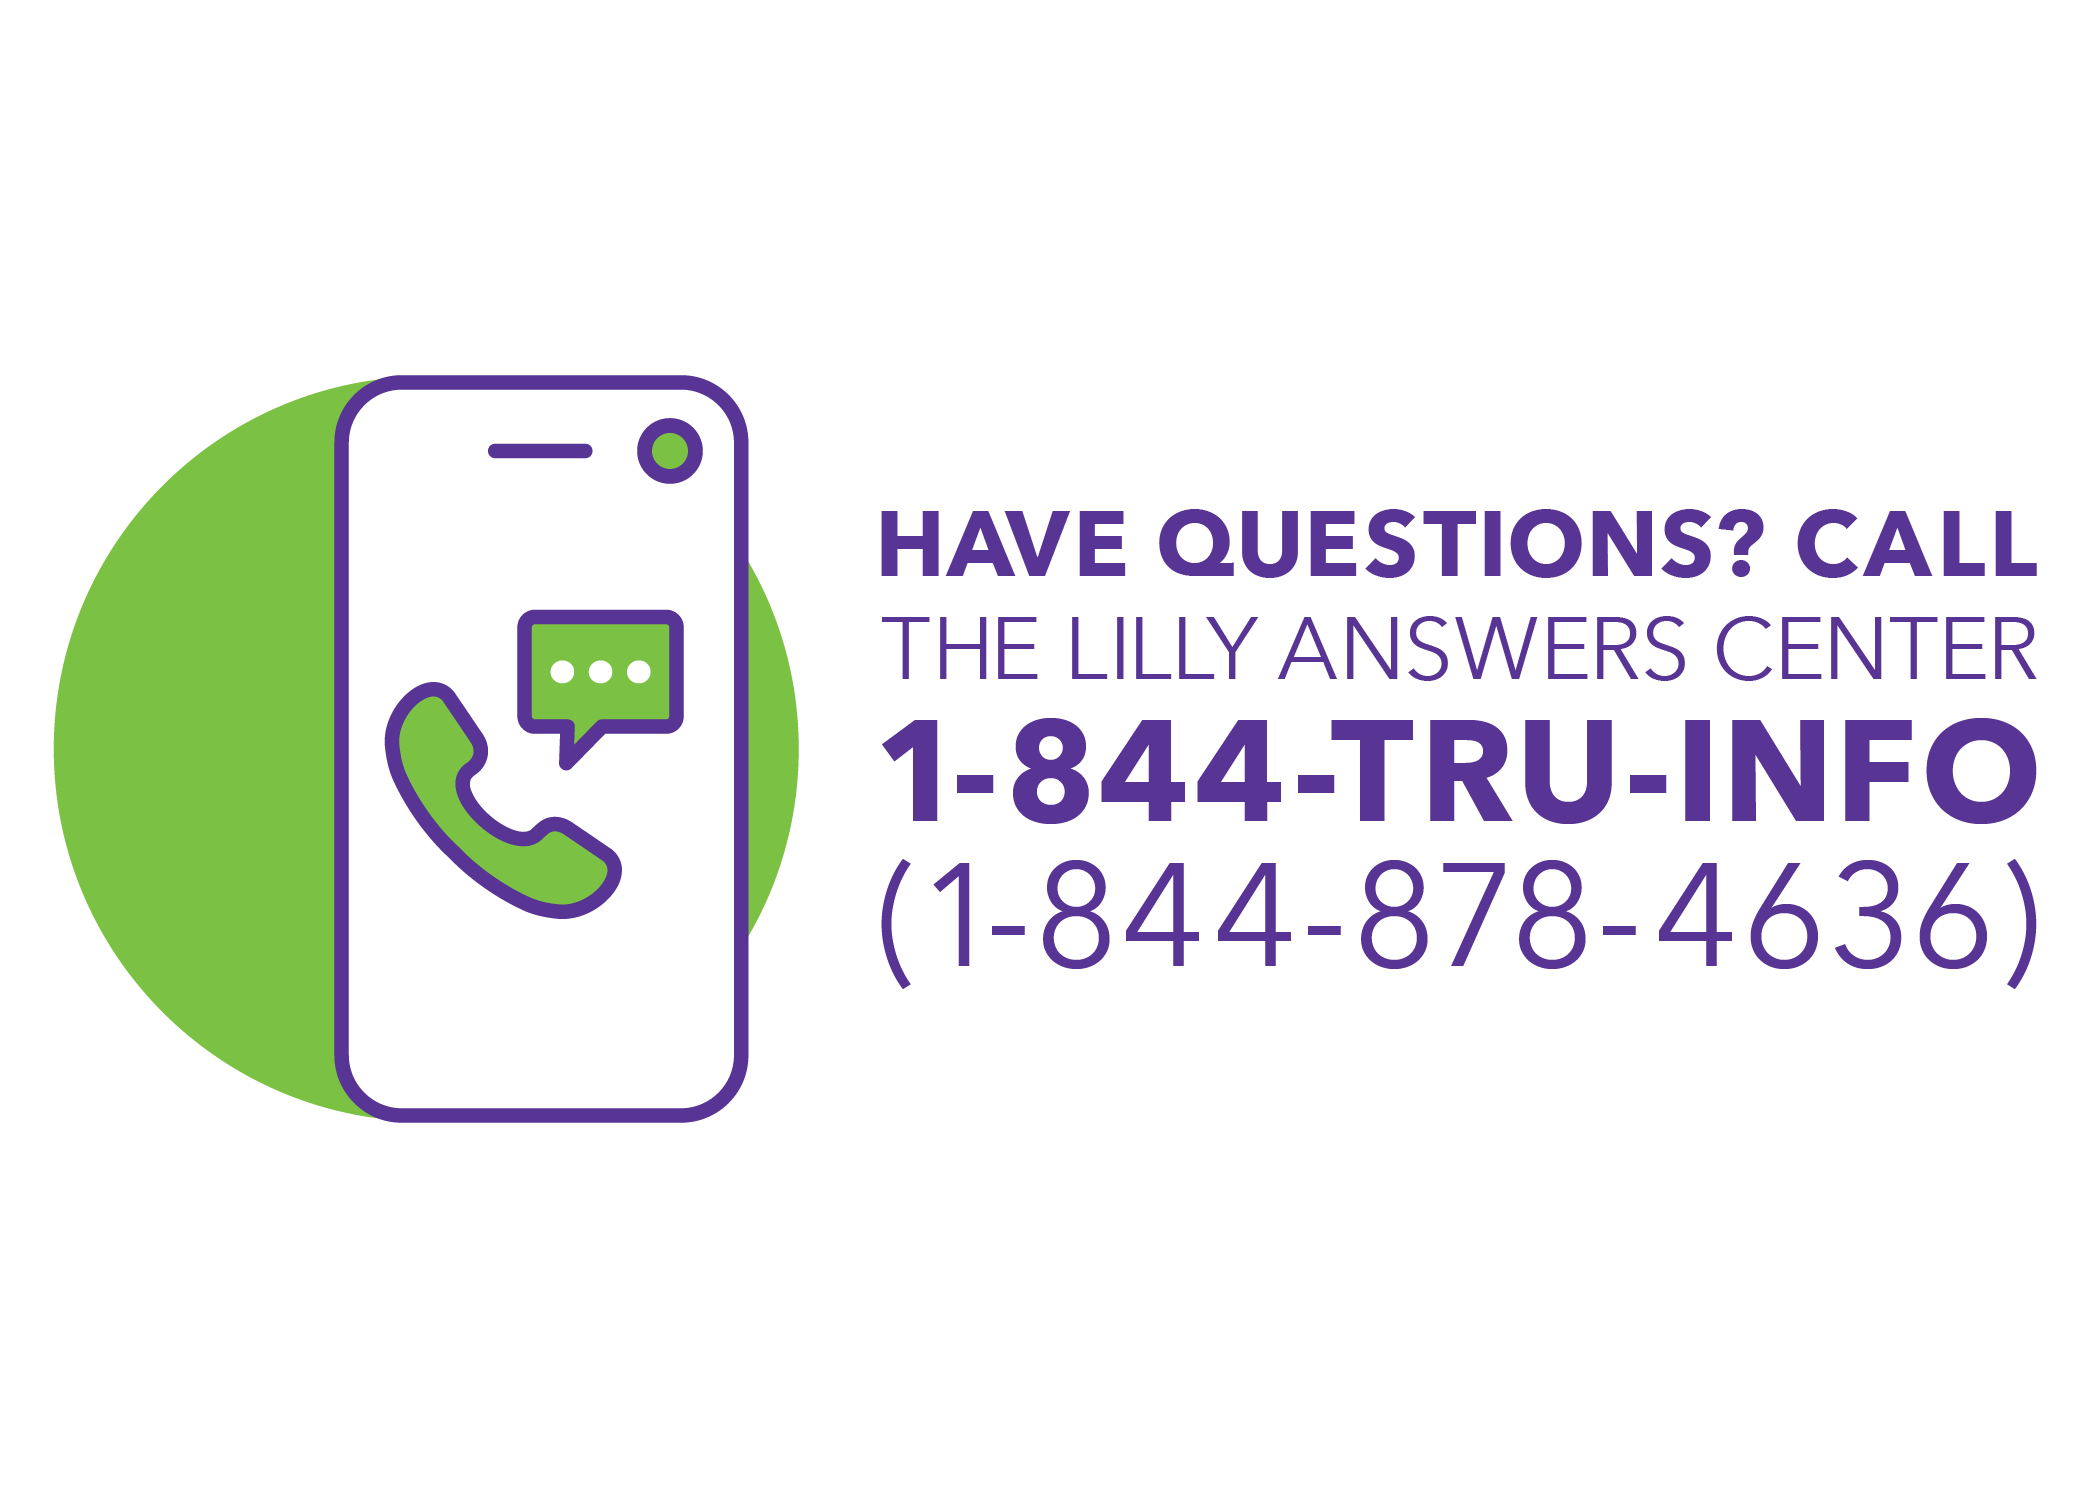 Call 1-844-TRUINFO for any questions regarding Trulicity